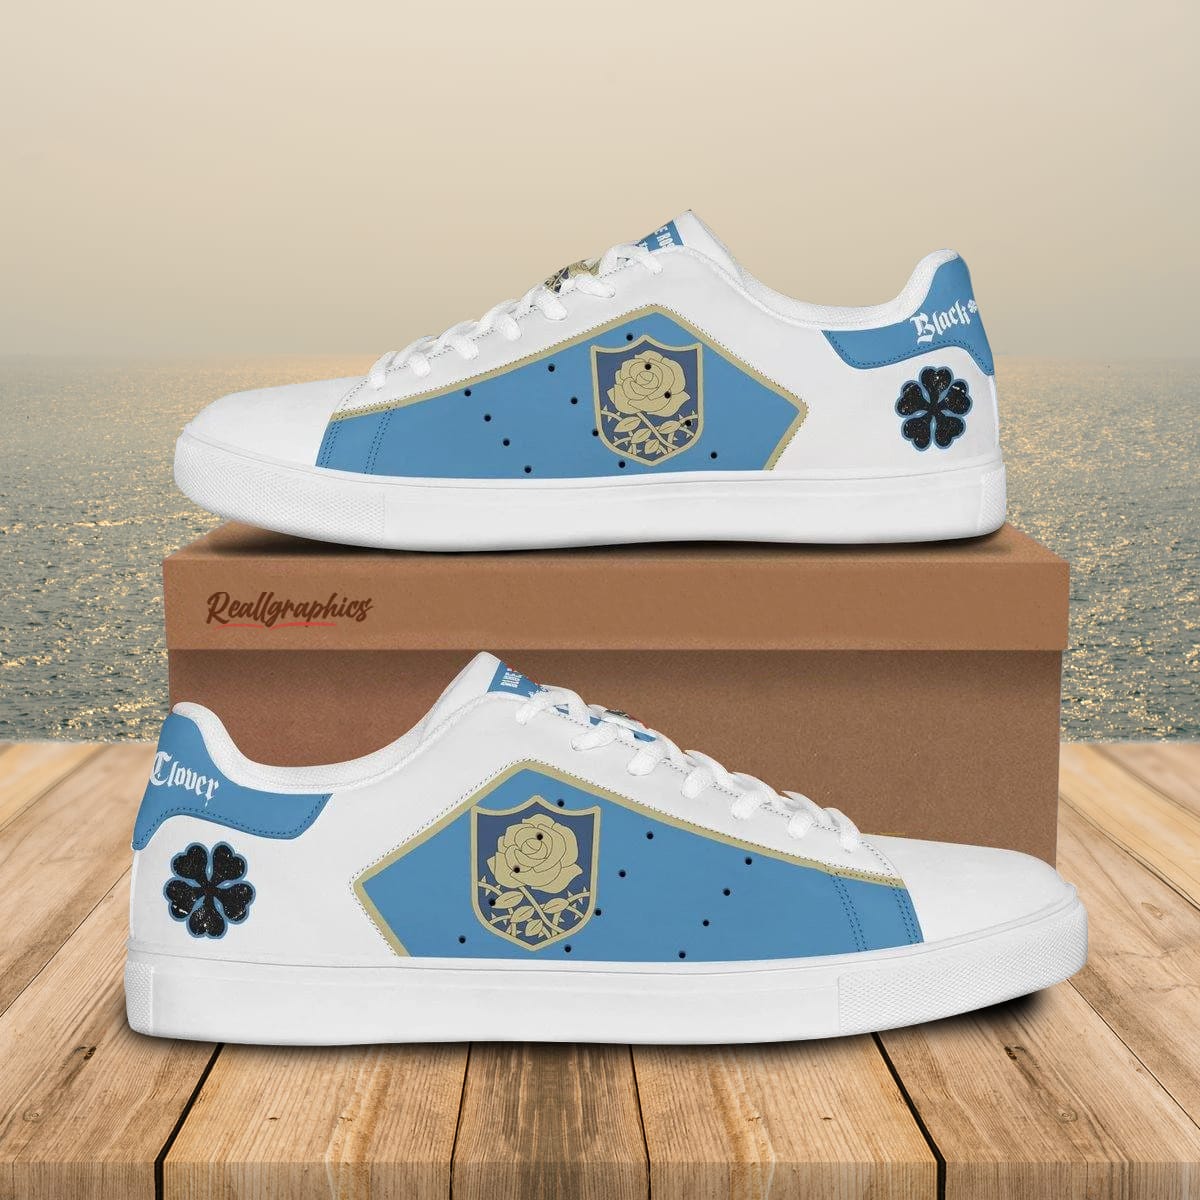 black clover blue rose stan smith shoes, custom anime sneakers